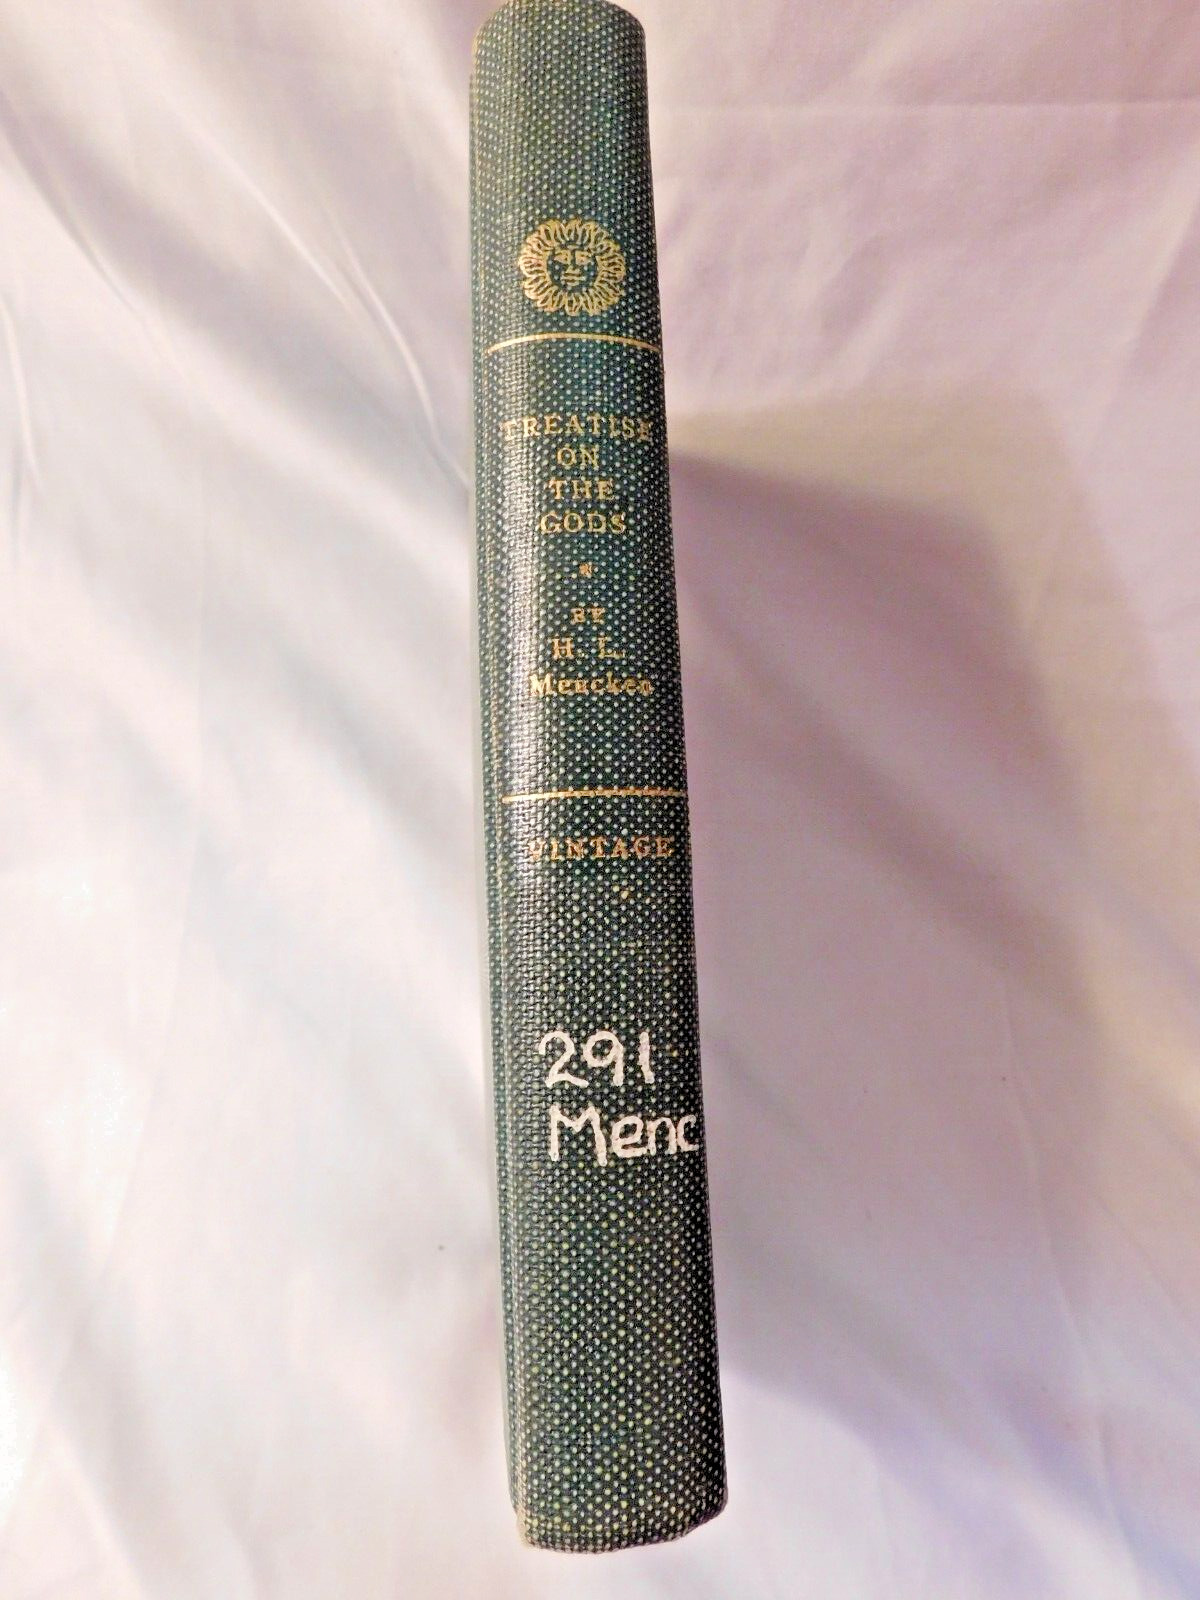 Treatise On the Gods by H. L. Mencken Hardcover First Edition 1963